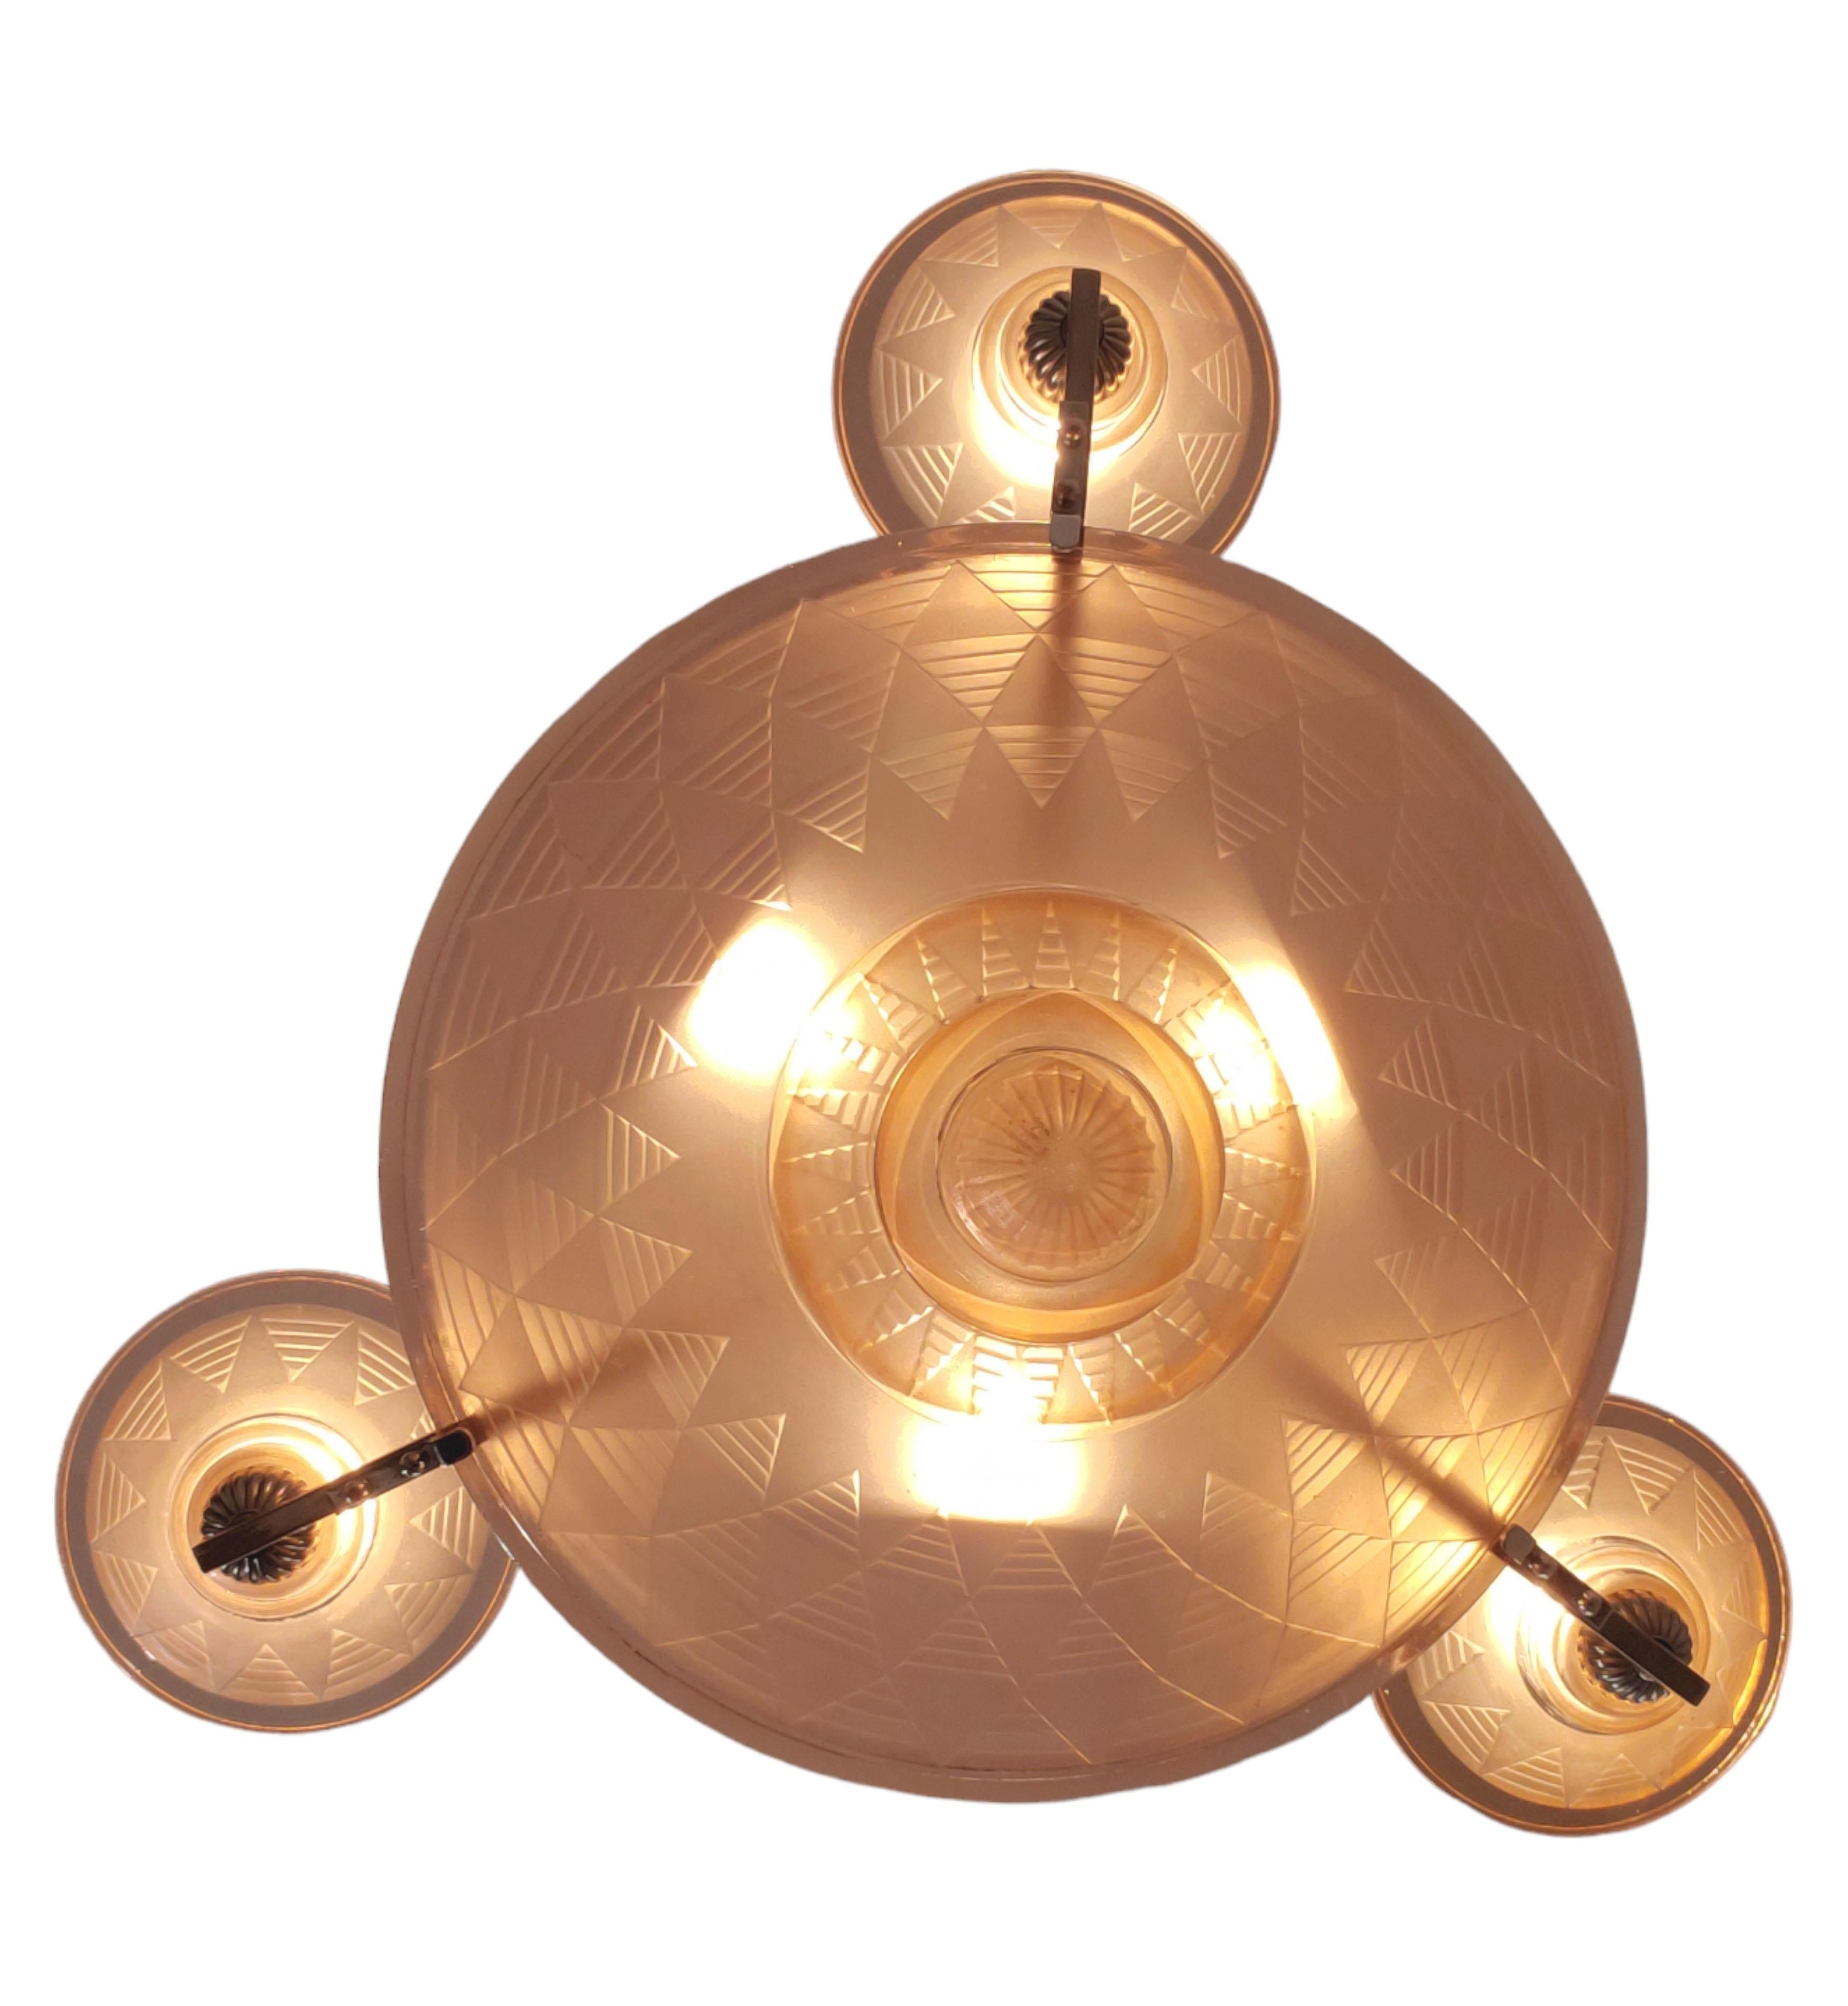 Petitot Art Deco peach /salmon /pink frosted glass + nickeled bronze chandelier For Sale 7